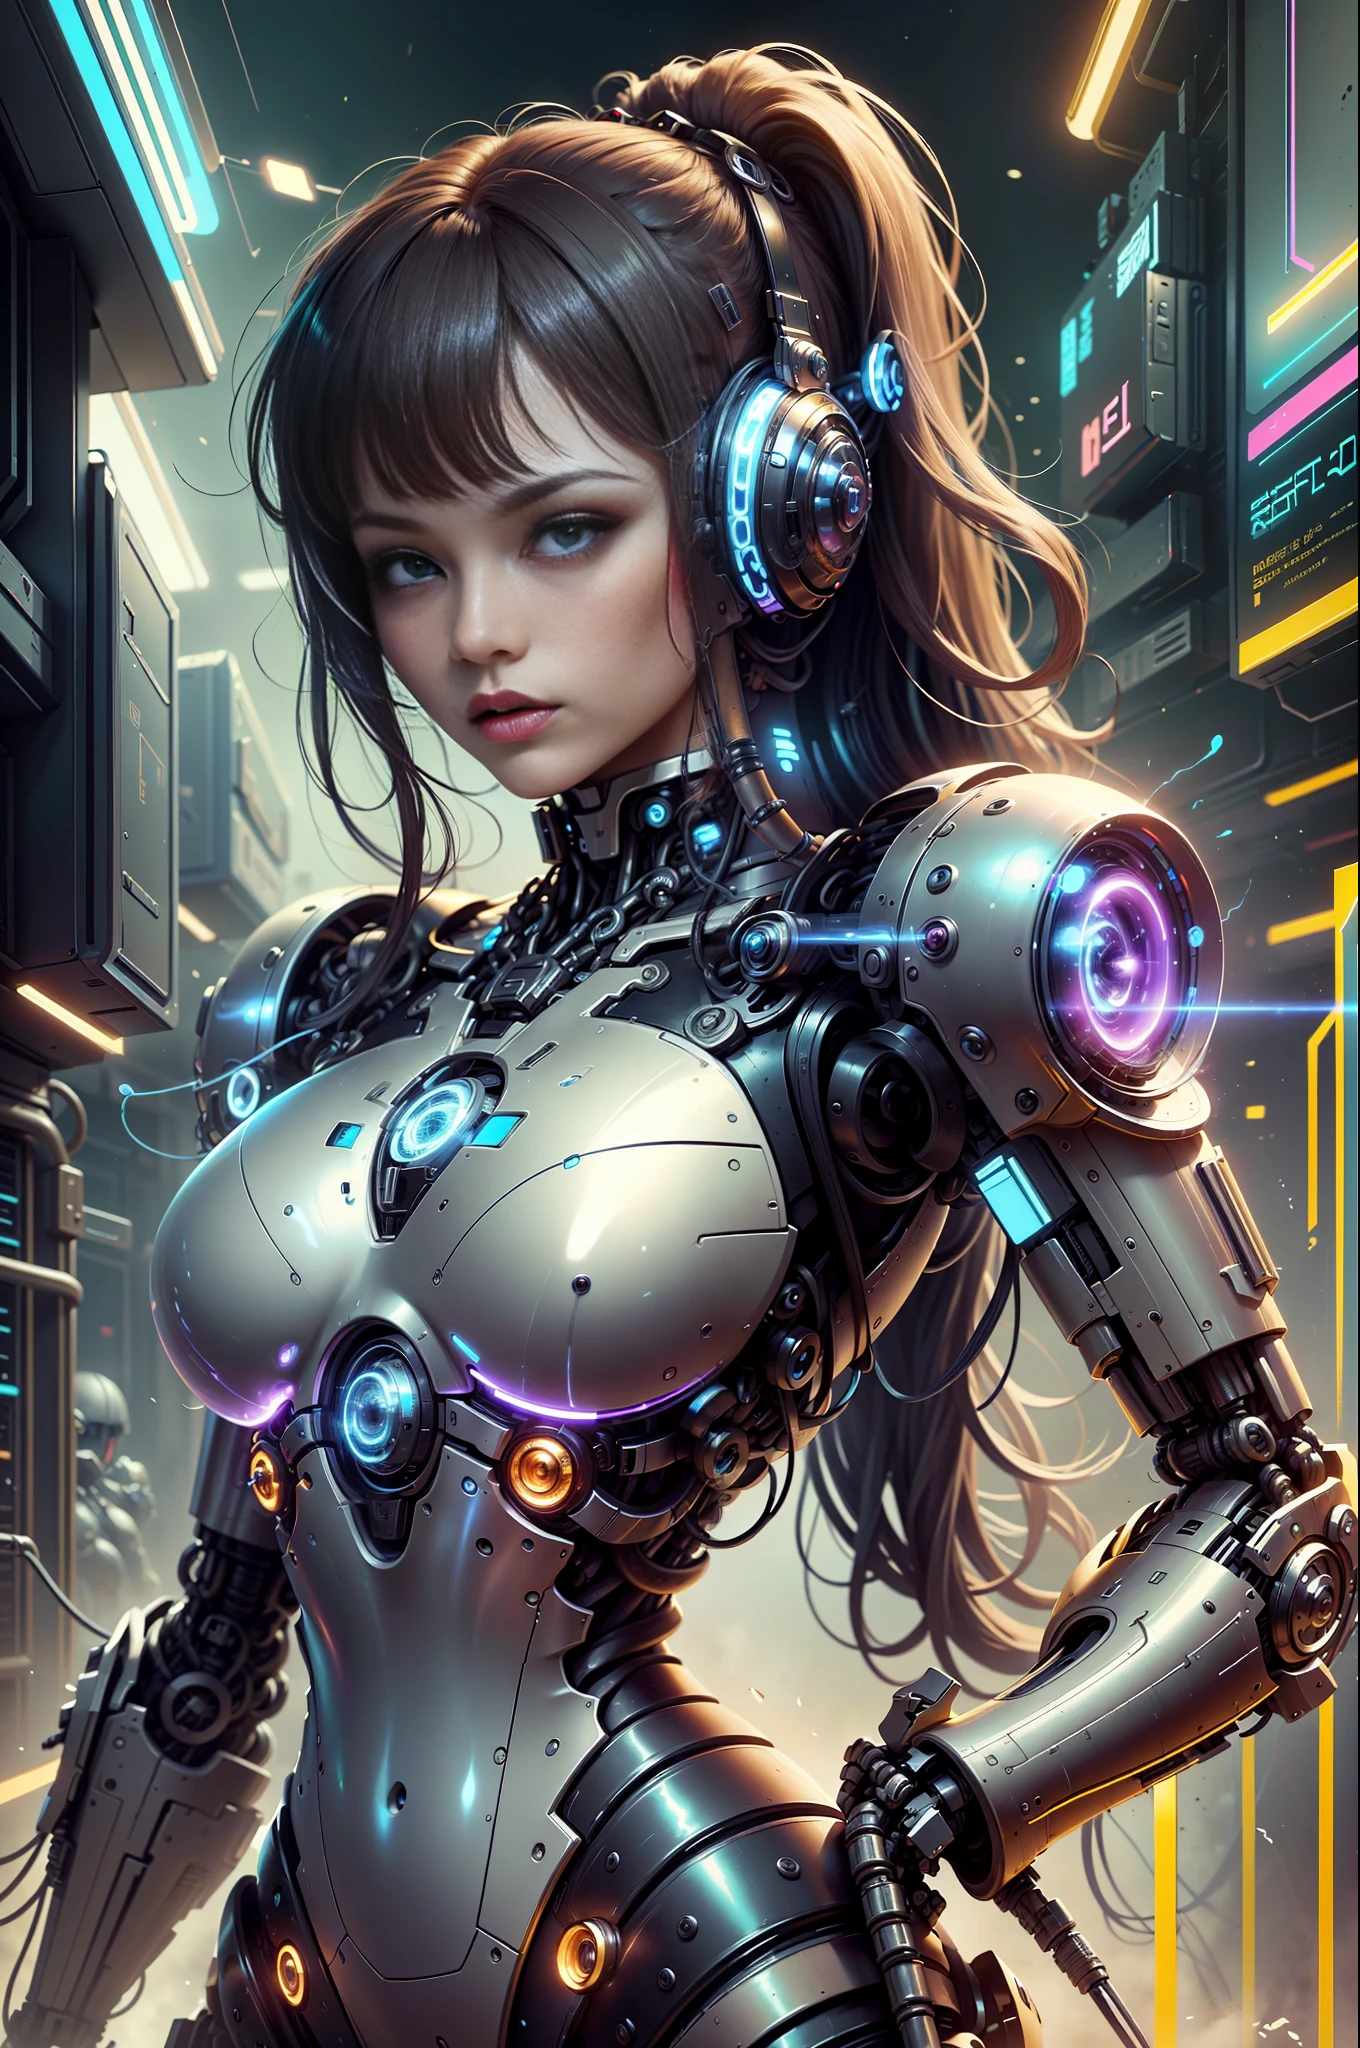 (Masterpiece, Top Quality, Best Quality, Official Art, Beauty and Aesthetic: 1.2), (1 Girl), Mecha, Future, Technology, Light, Cyberpunk City, Entanglement, Upper Body, Extremely Detailed, (Fractal Art: 1.3), colorful and most detailed --auto --s2